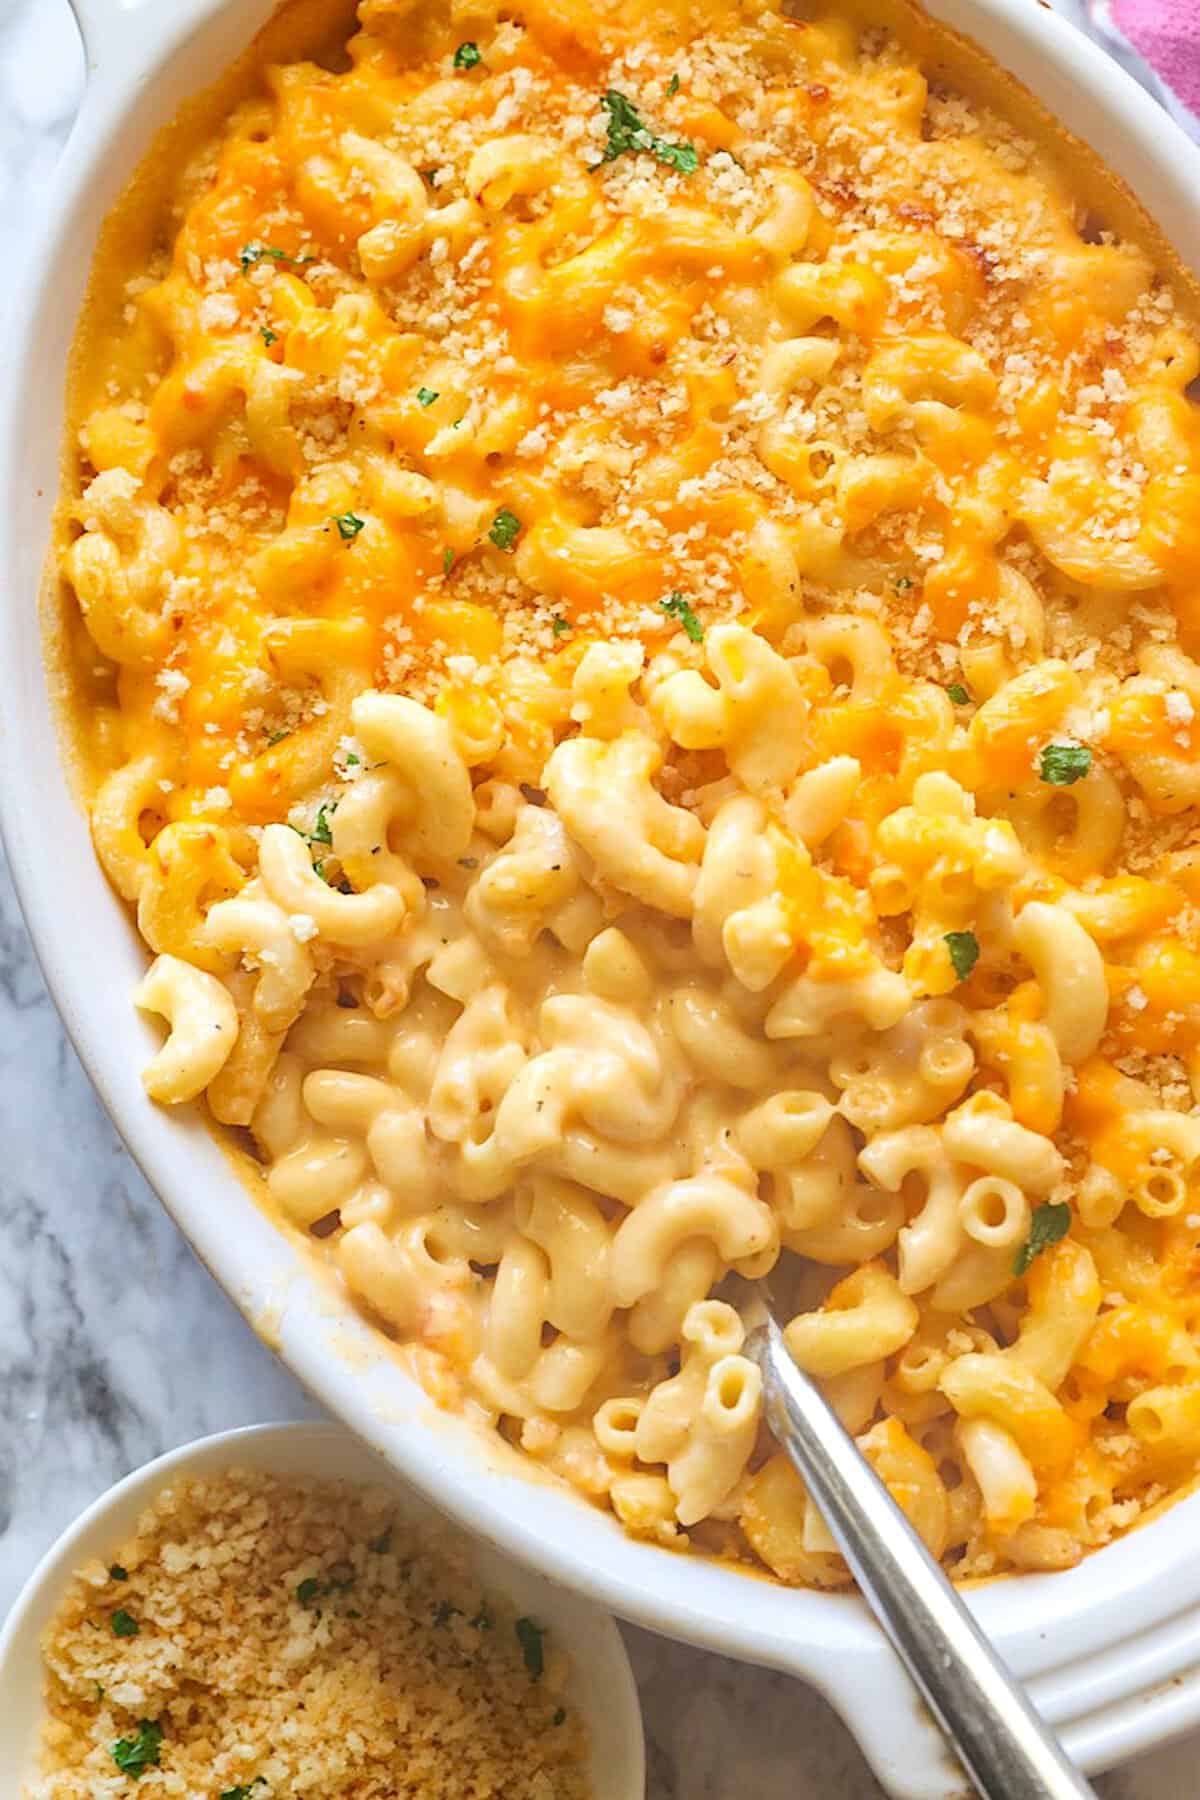 Spooning up a serving for melty, creamy Velveeta mac and cheese